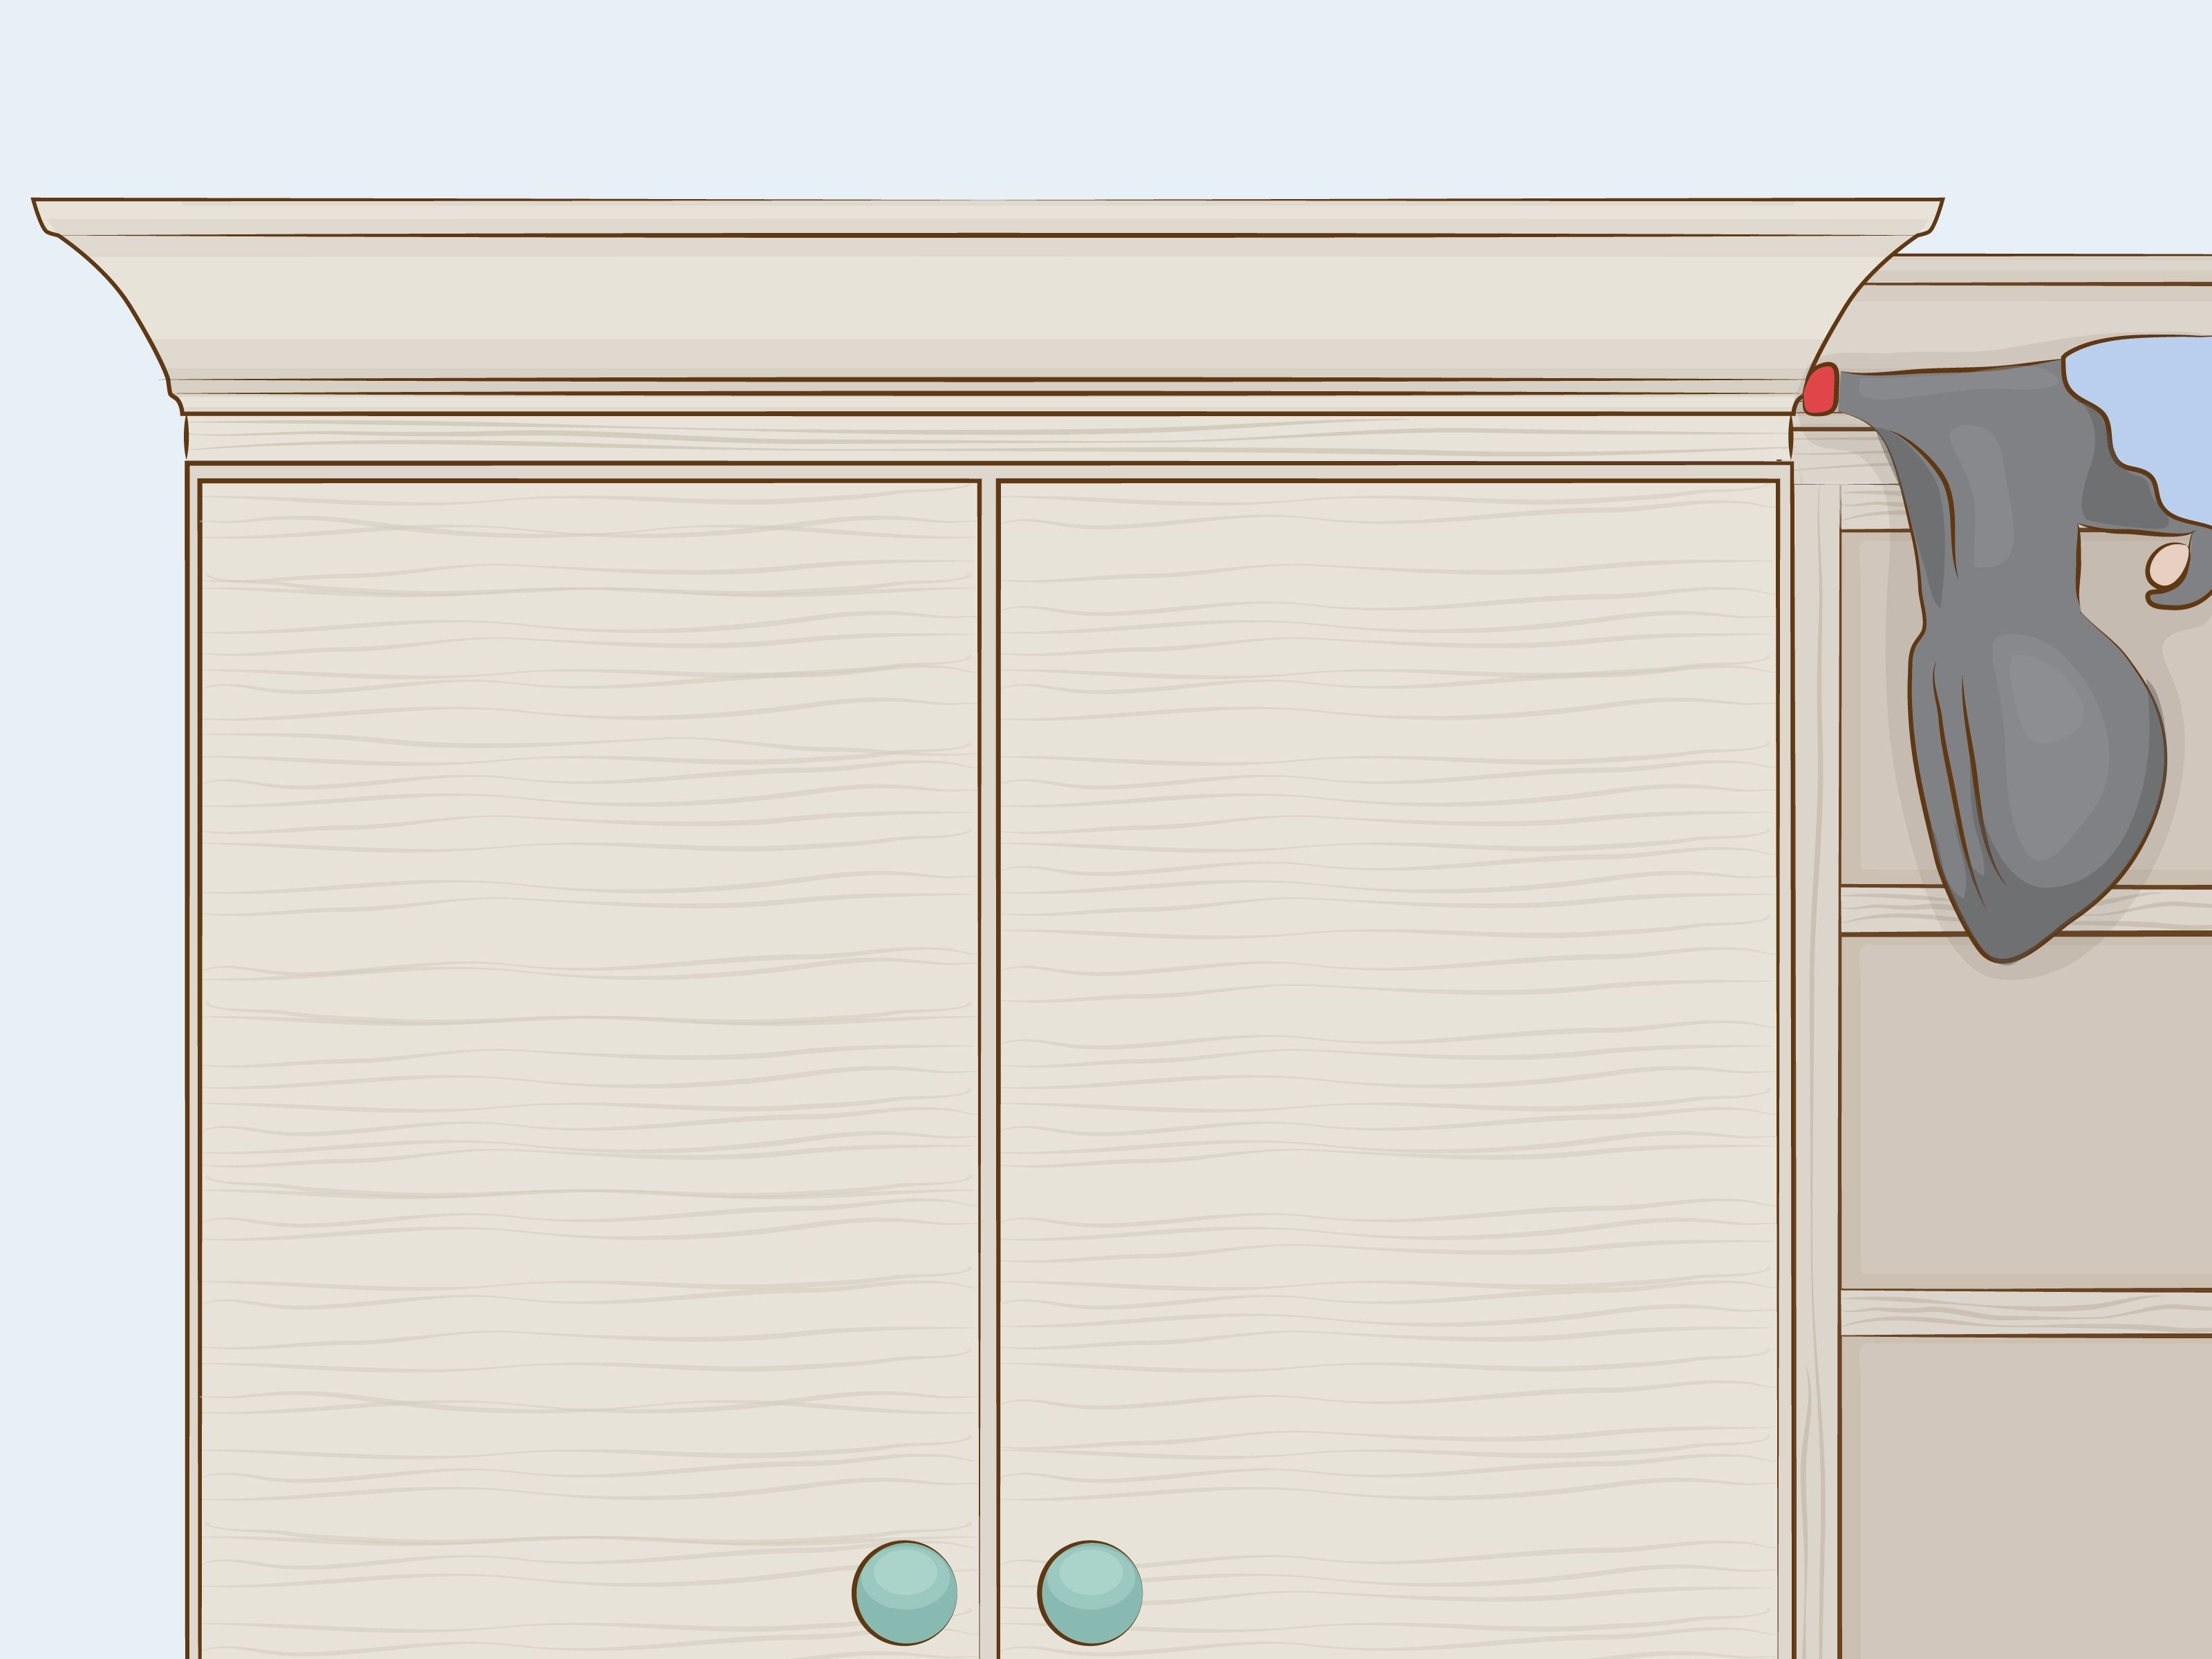 How To Cut Crown Molding For Cabinets: 12 Steps (with Pictures) Throughout Most Recent Walnut Finish Crown Moulding Sideboards (View 16 of 20)